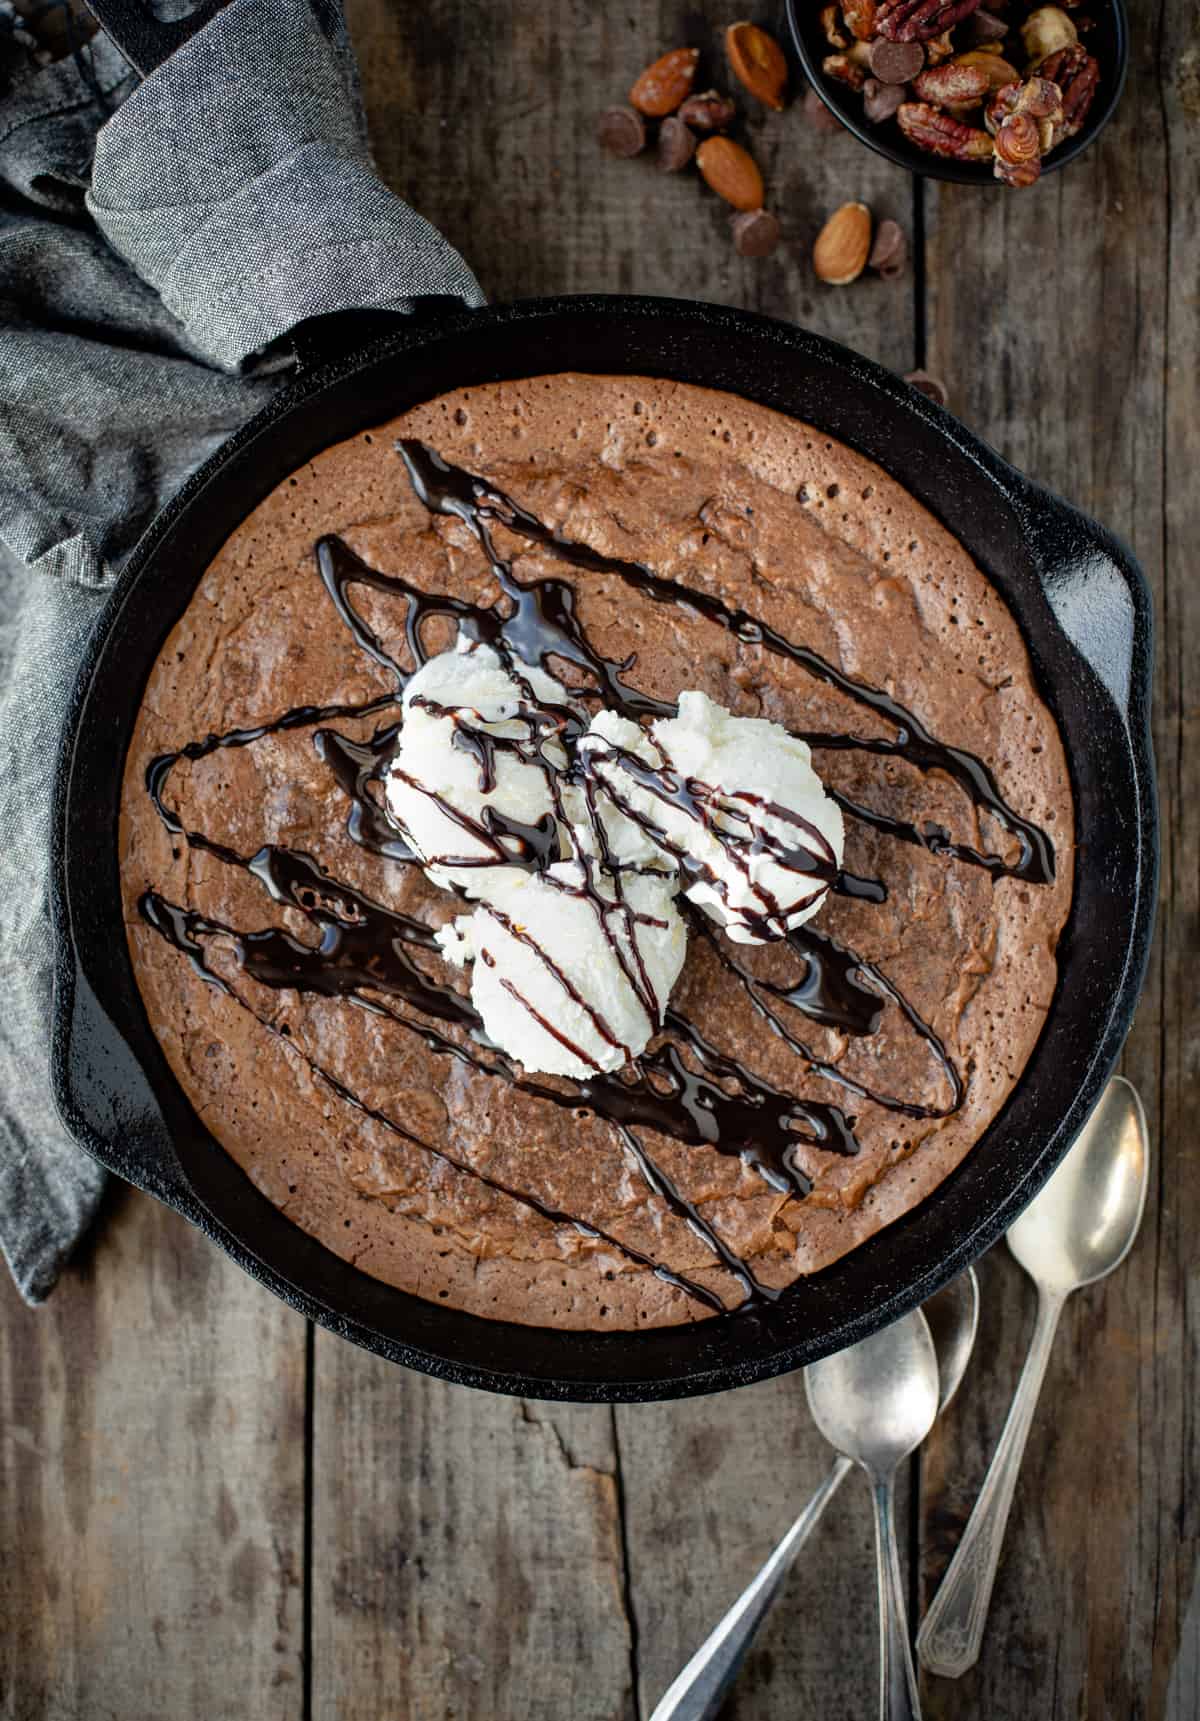 A cast iron pan full of skillet brownies topped with ice cream.